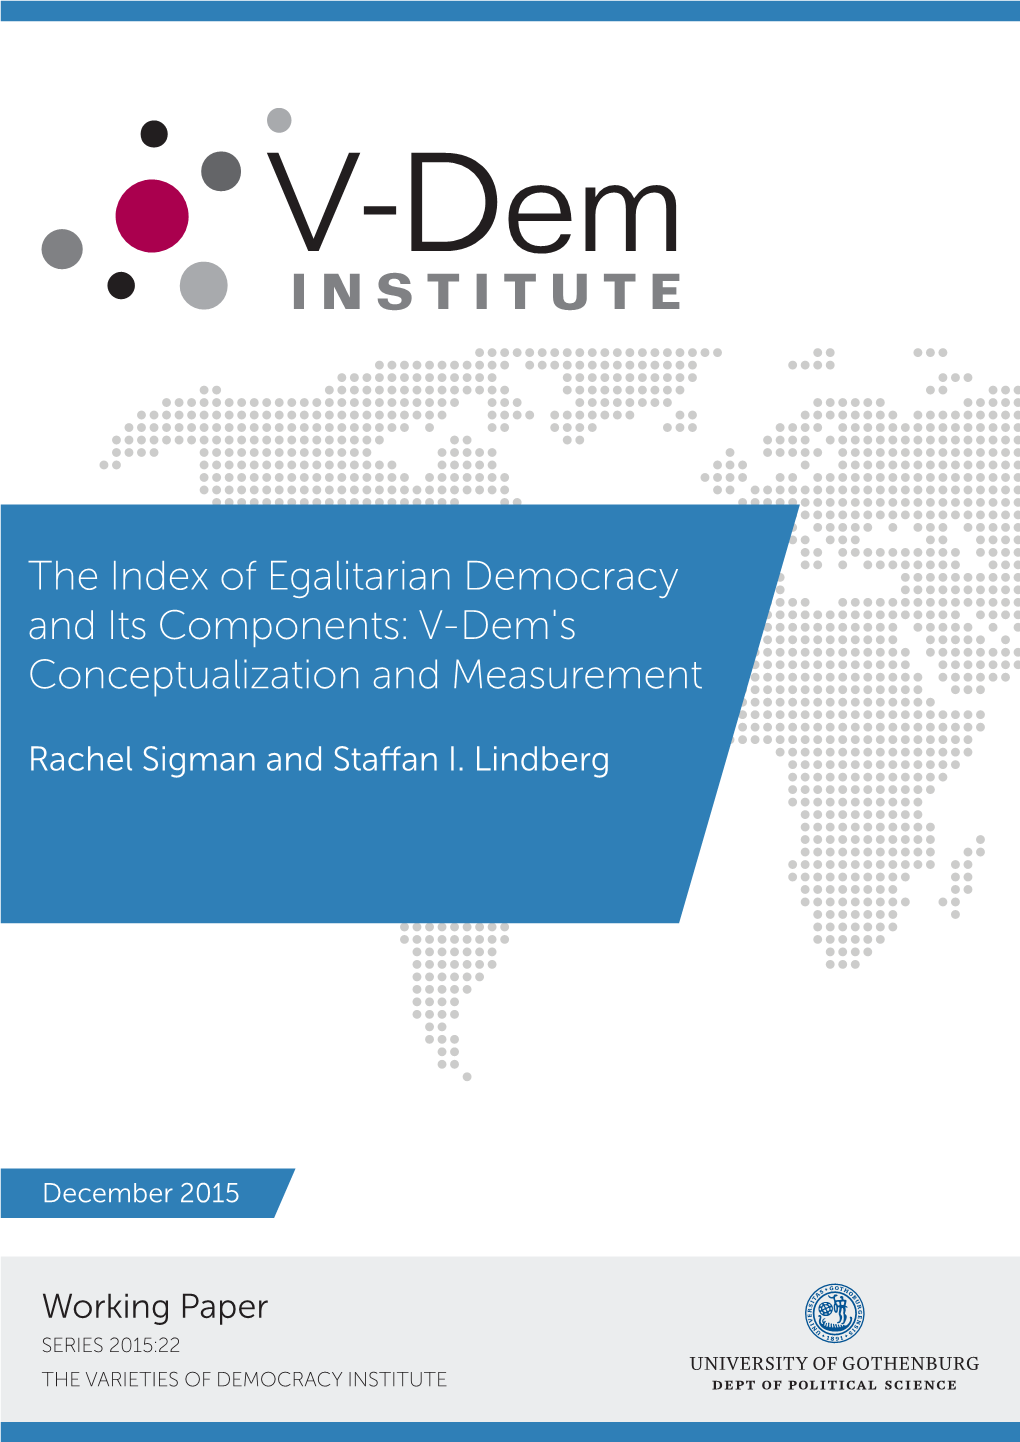 The Index of Egalitarian Democracy and Its Components: V-Dem's Conceptualization and Measurement